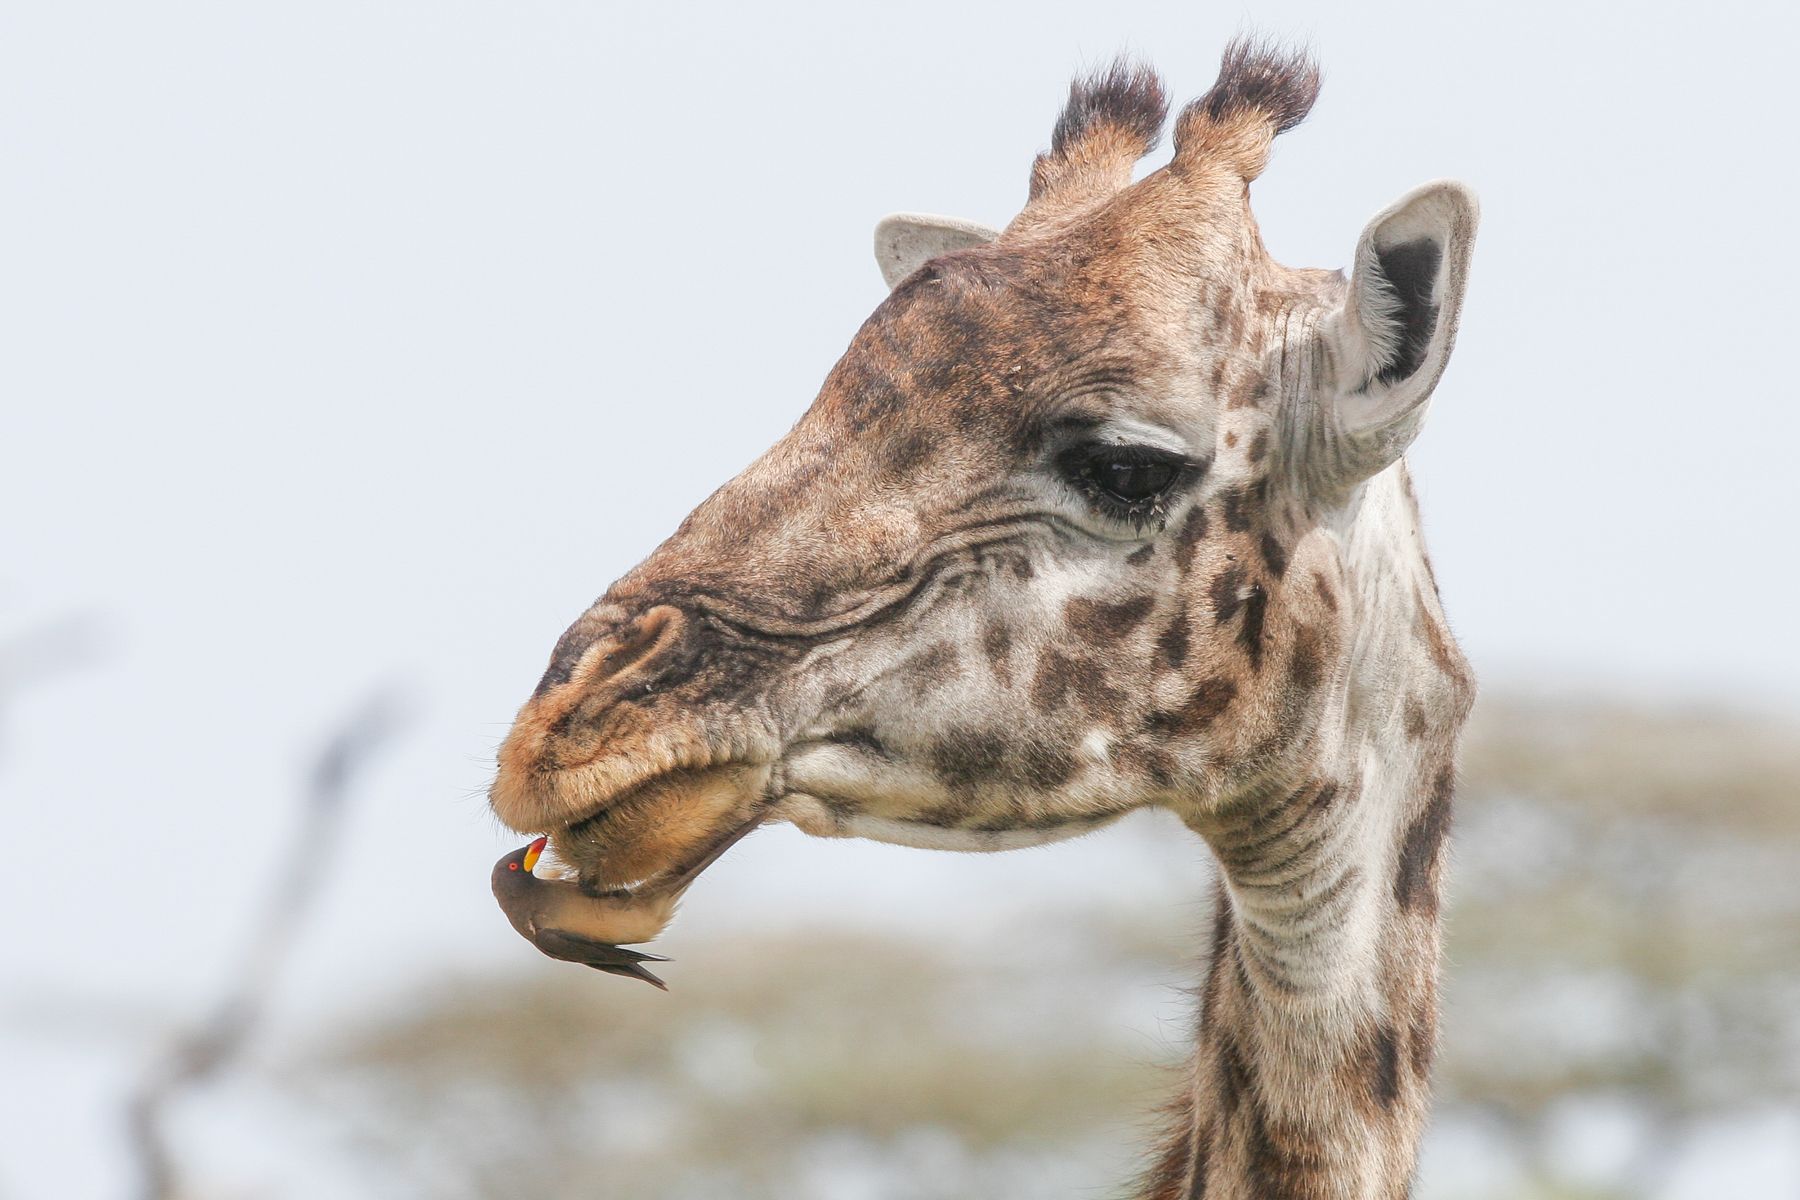 You don't have to worry about those annoying Giraffe parasites when the oxpecker dentist comes to call